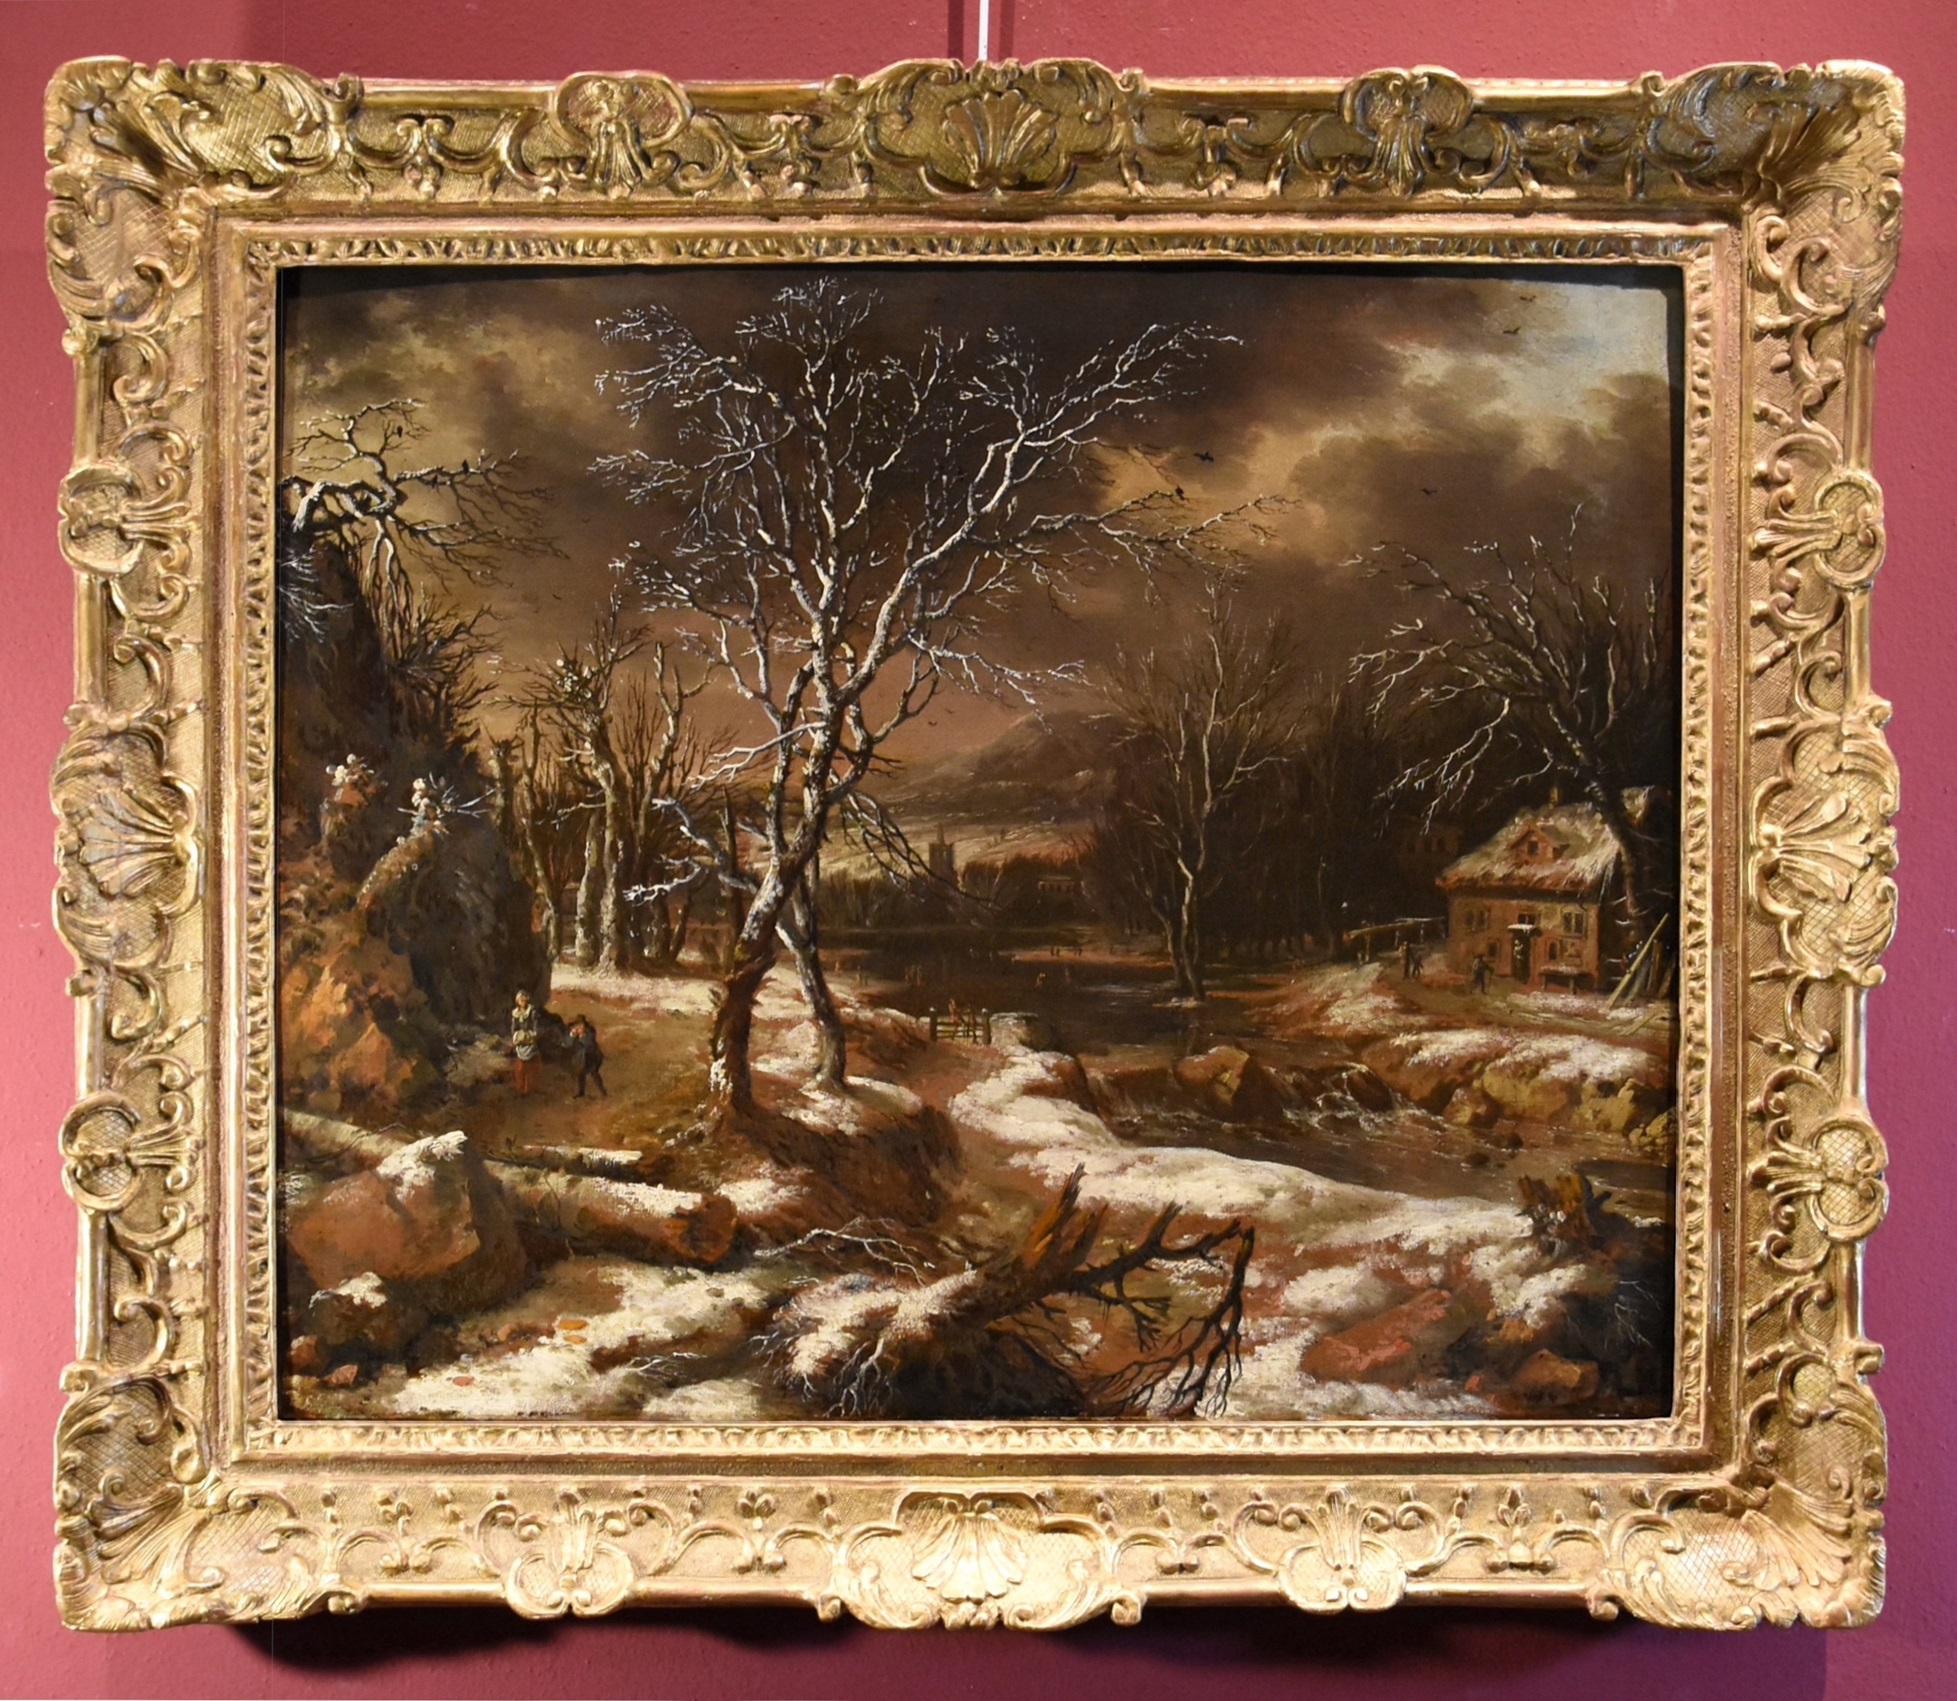 Winter Landscape Molenaer Paint 17th Century Oil on canvas Old master Flemish - Painting by Nicolaes (or Claes) Molenaer (Haarlem c. 1630 - 1676)